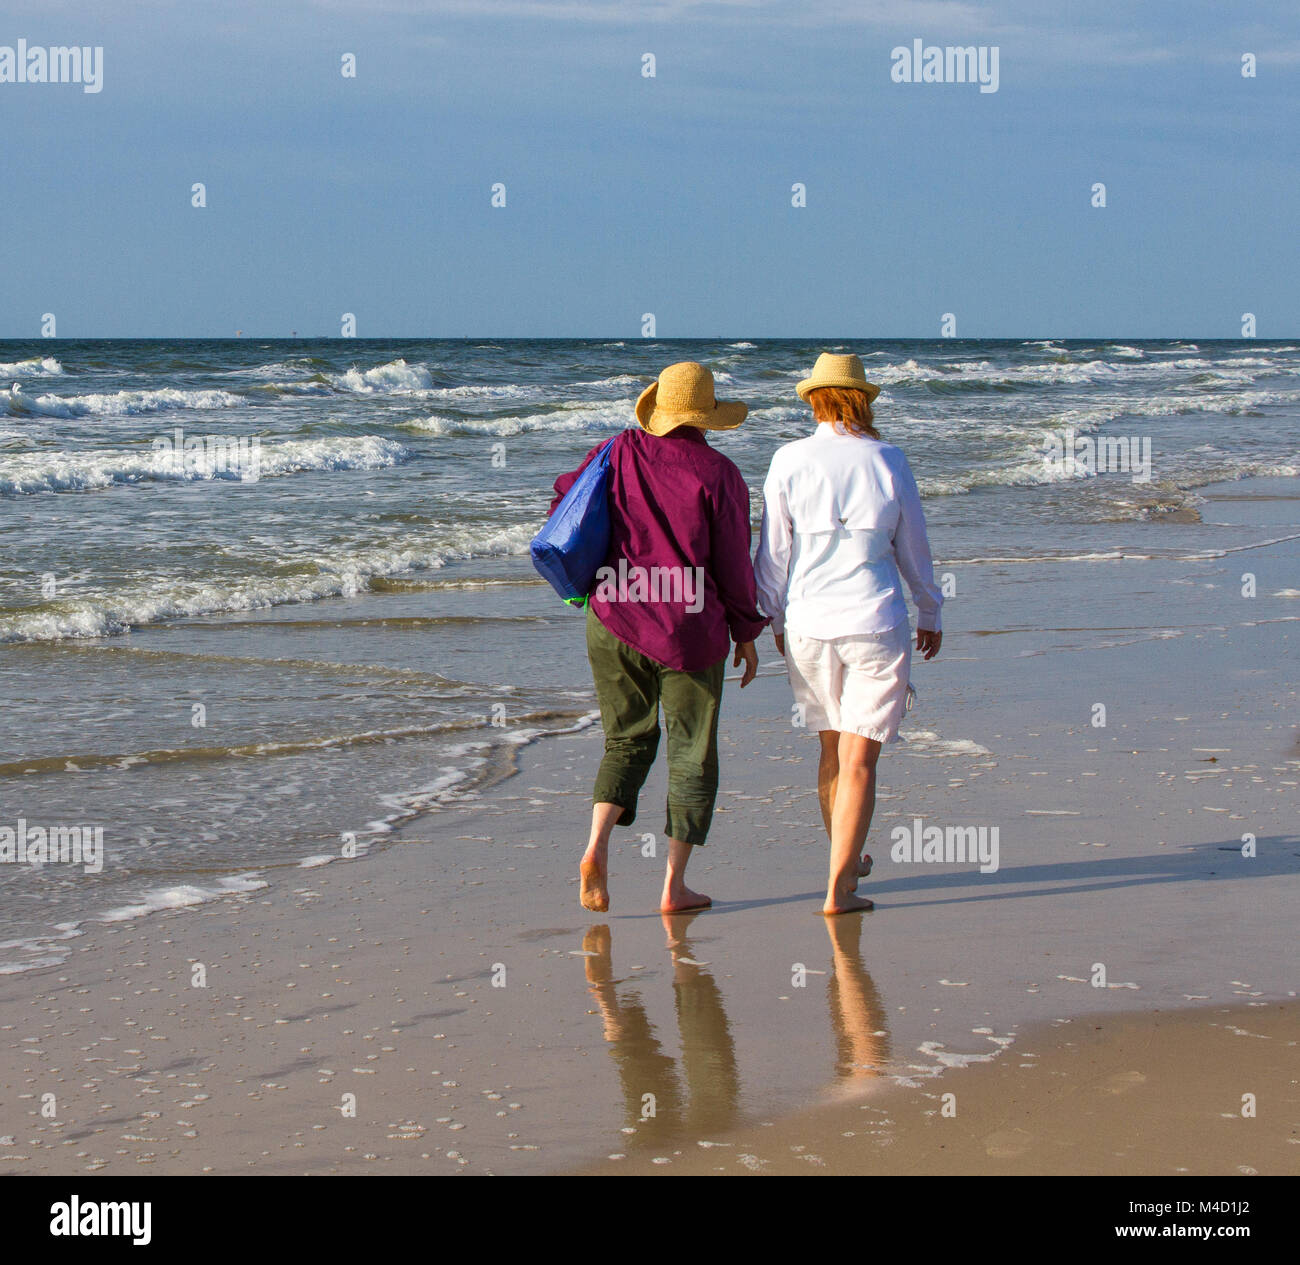 Two American senior citizen women walk together on a beach in the early morning. Stock Photo